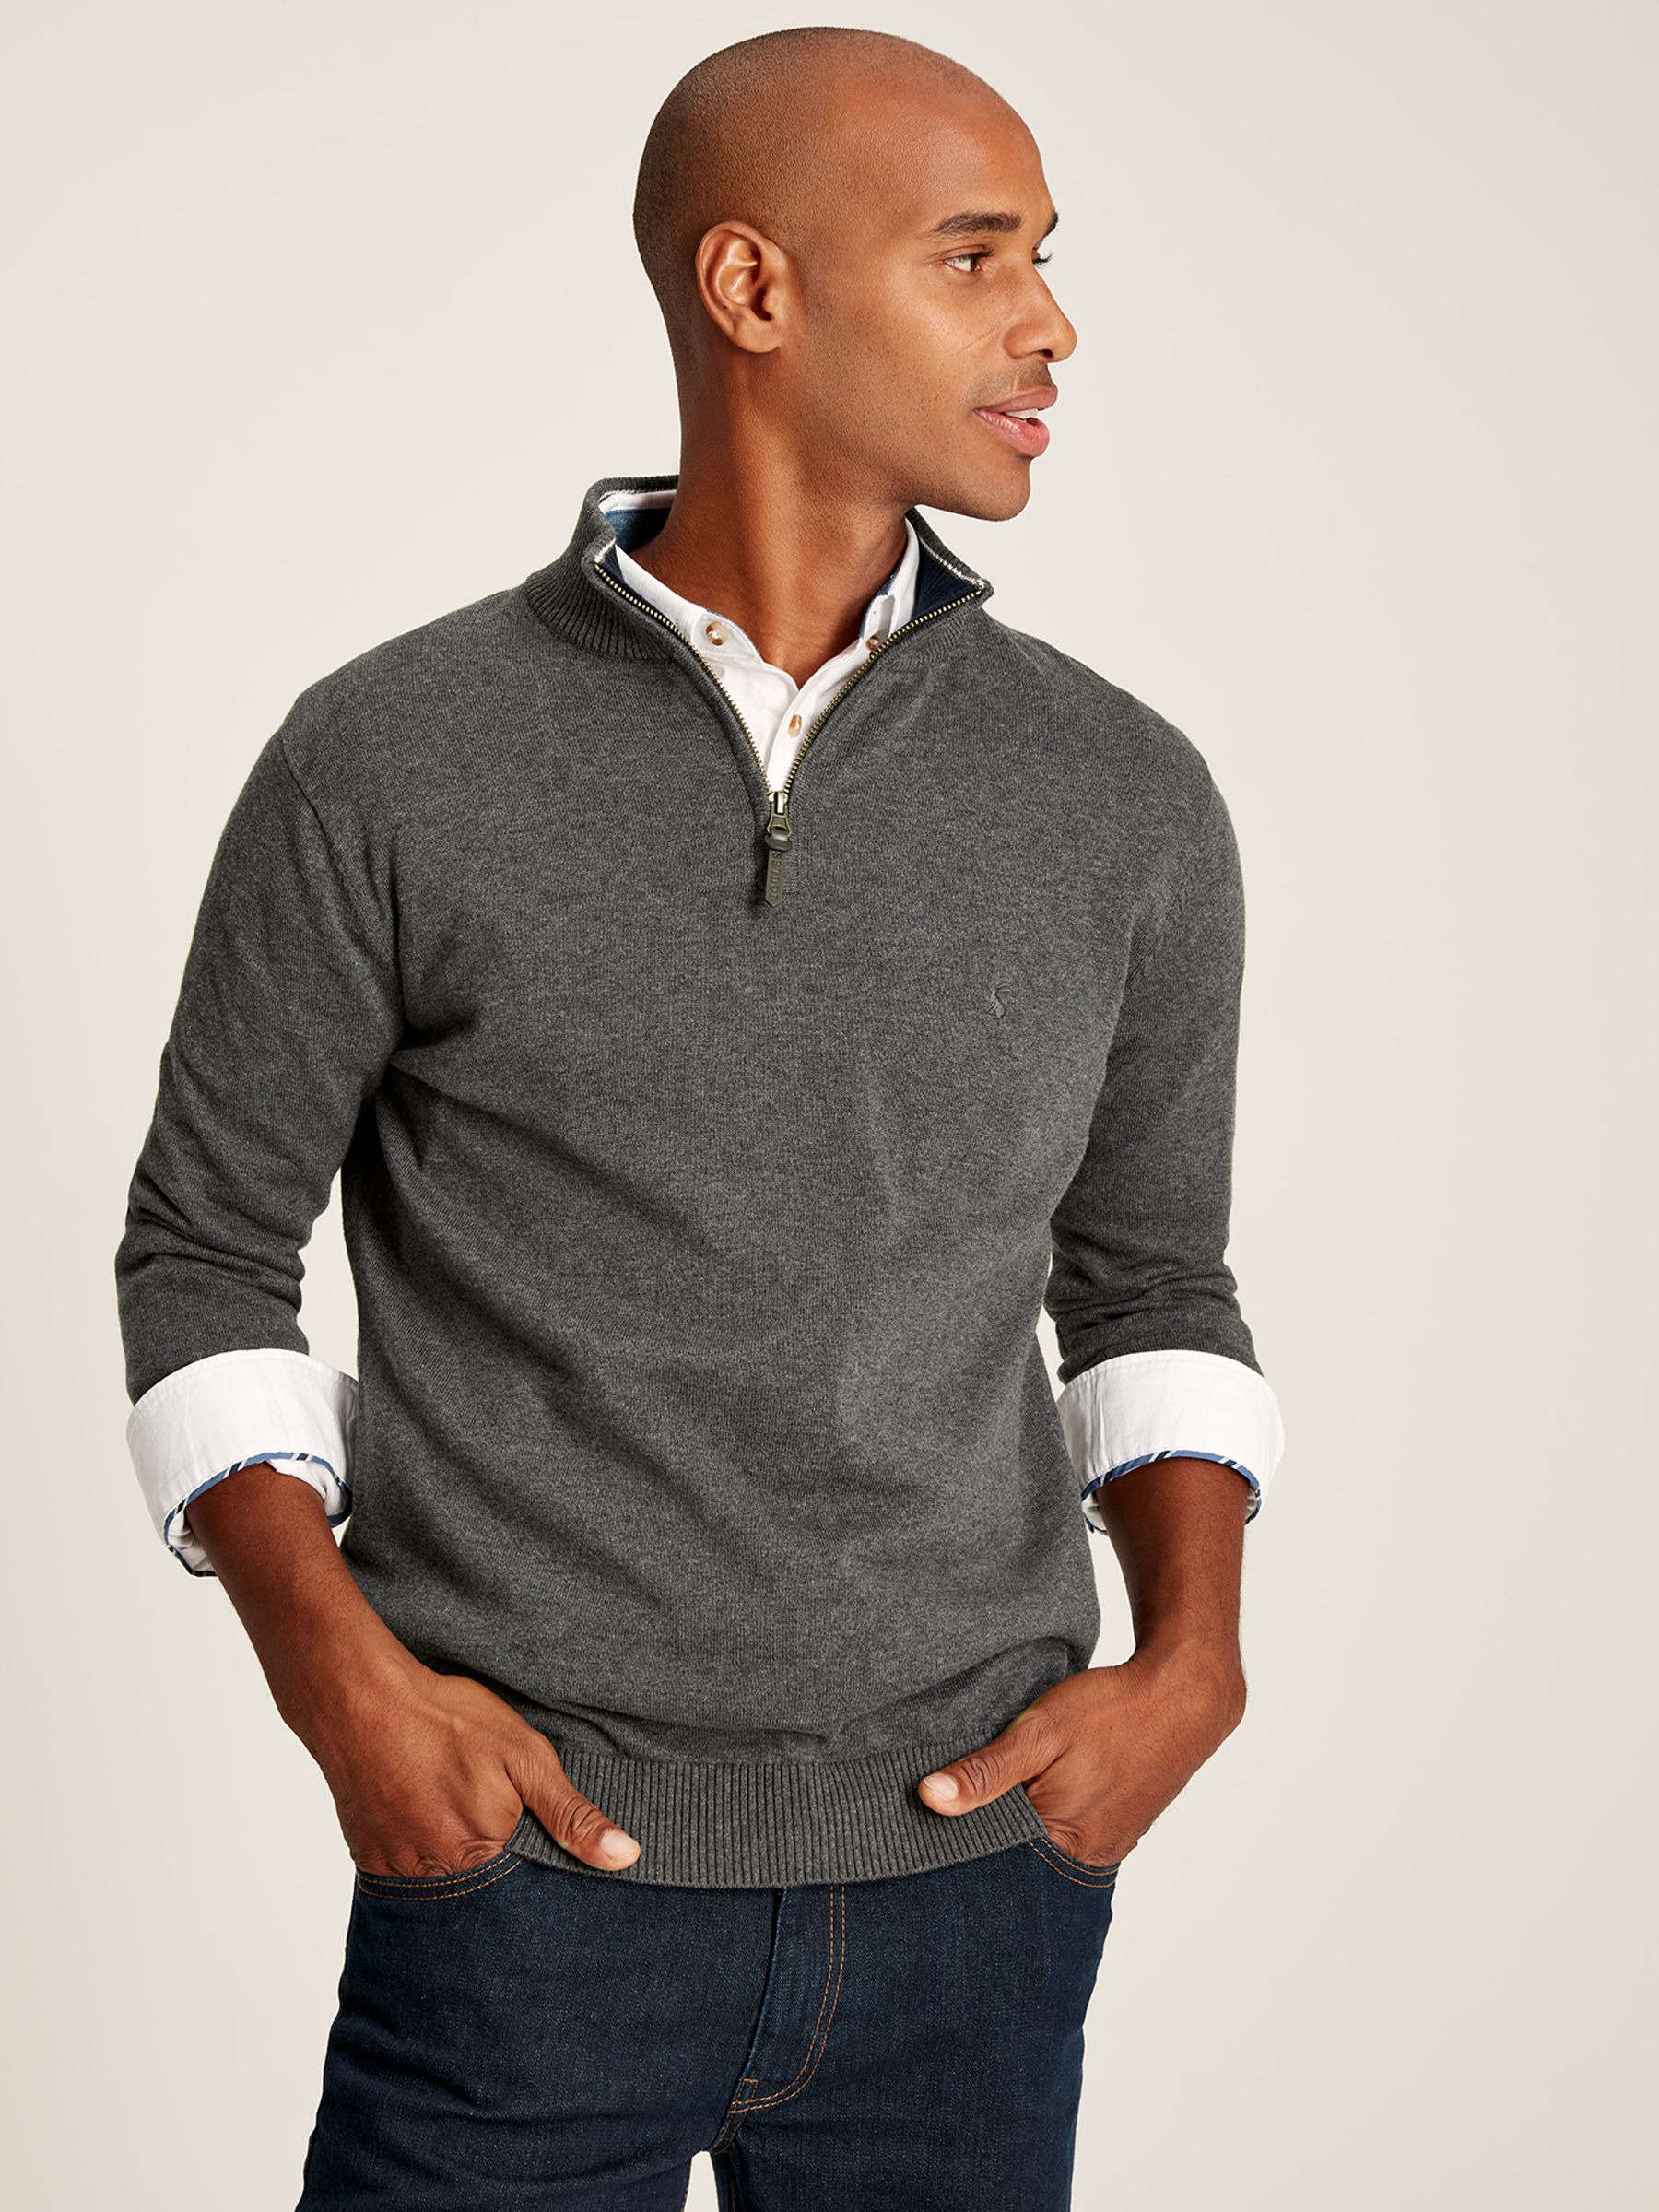 Buy Hillside Grey Knitted Quarter Zip Jumper from the Joules online shop